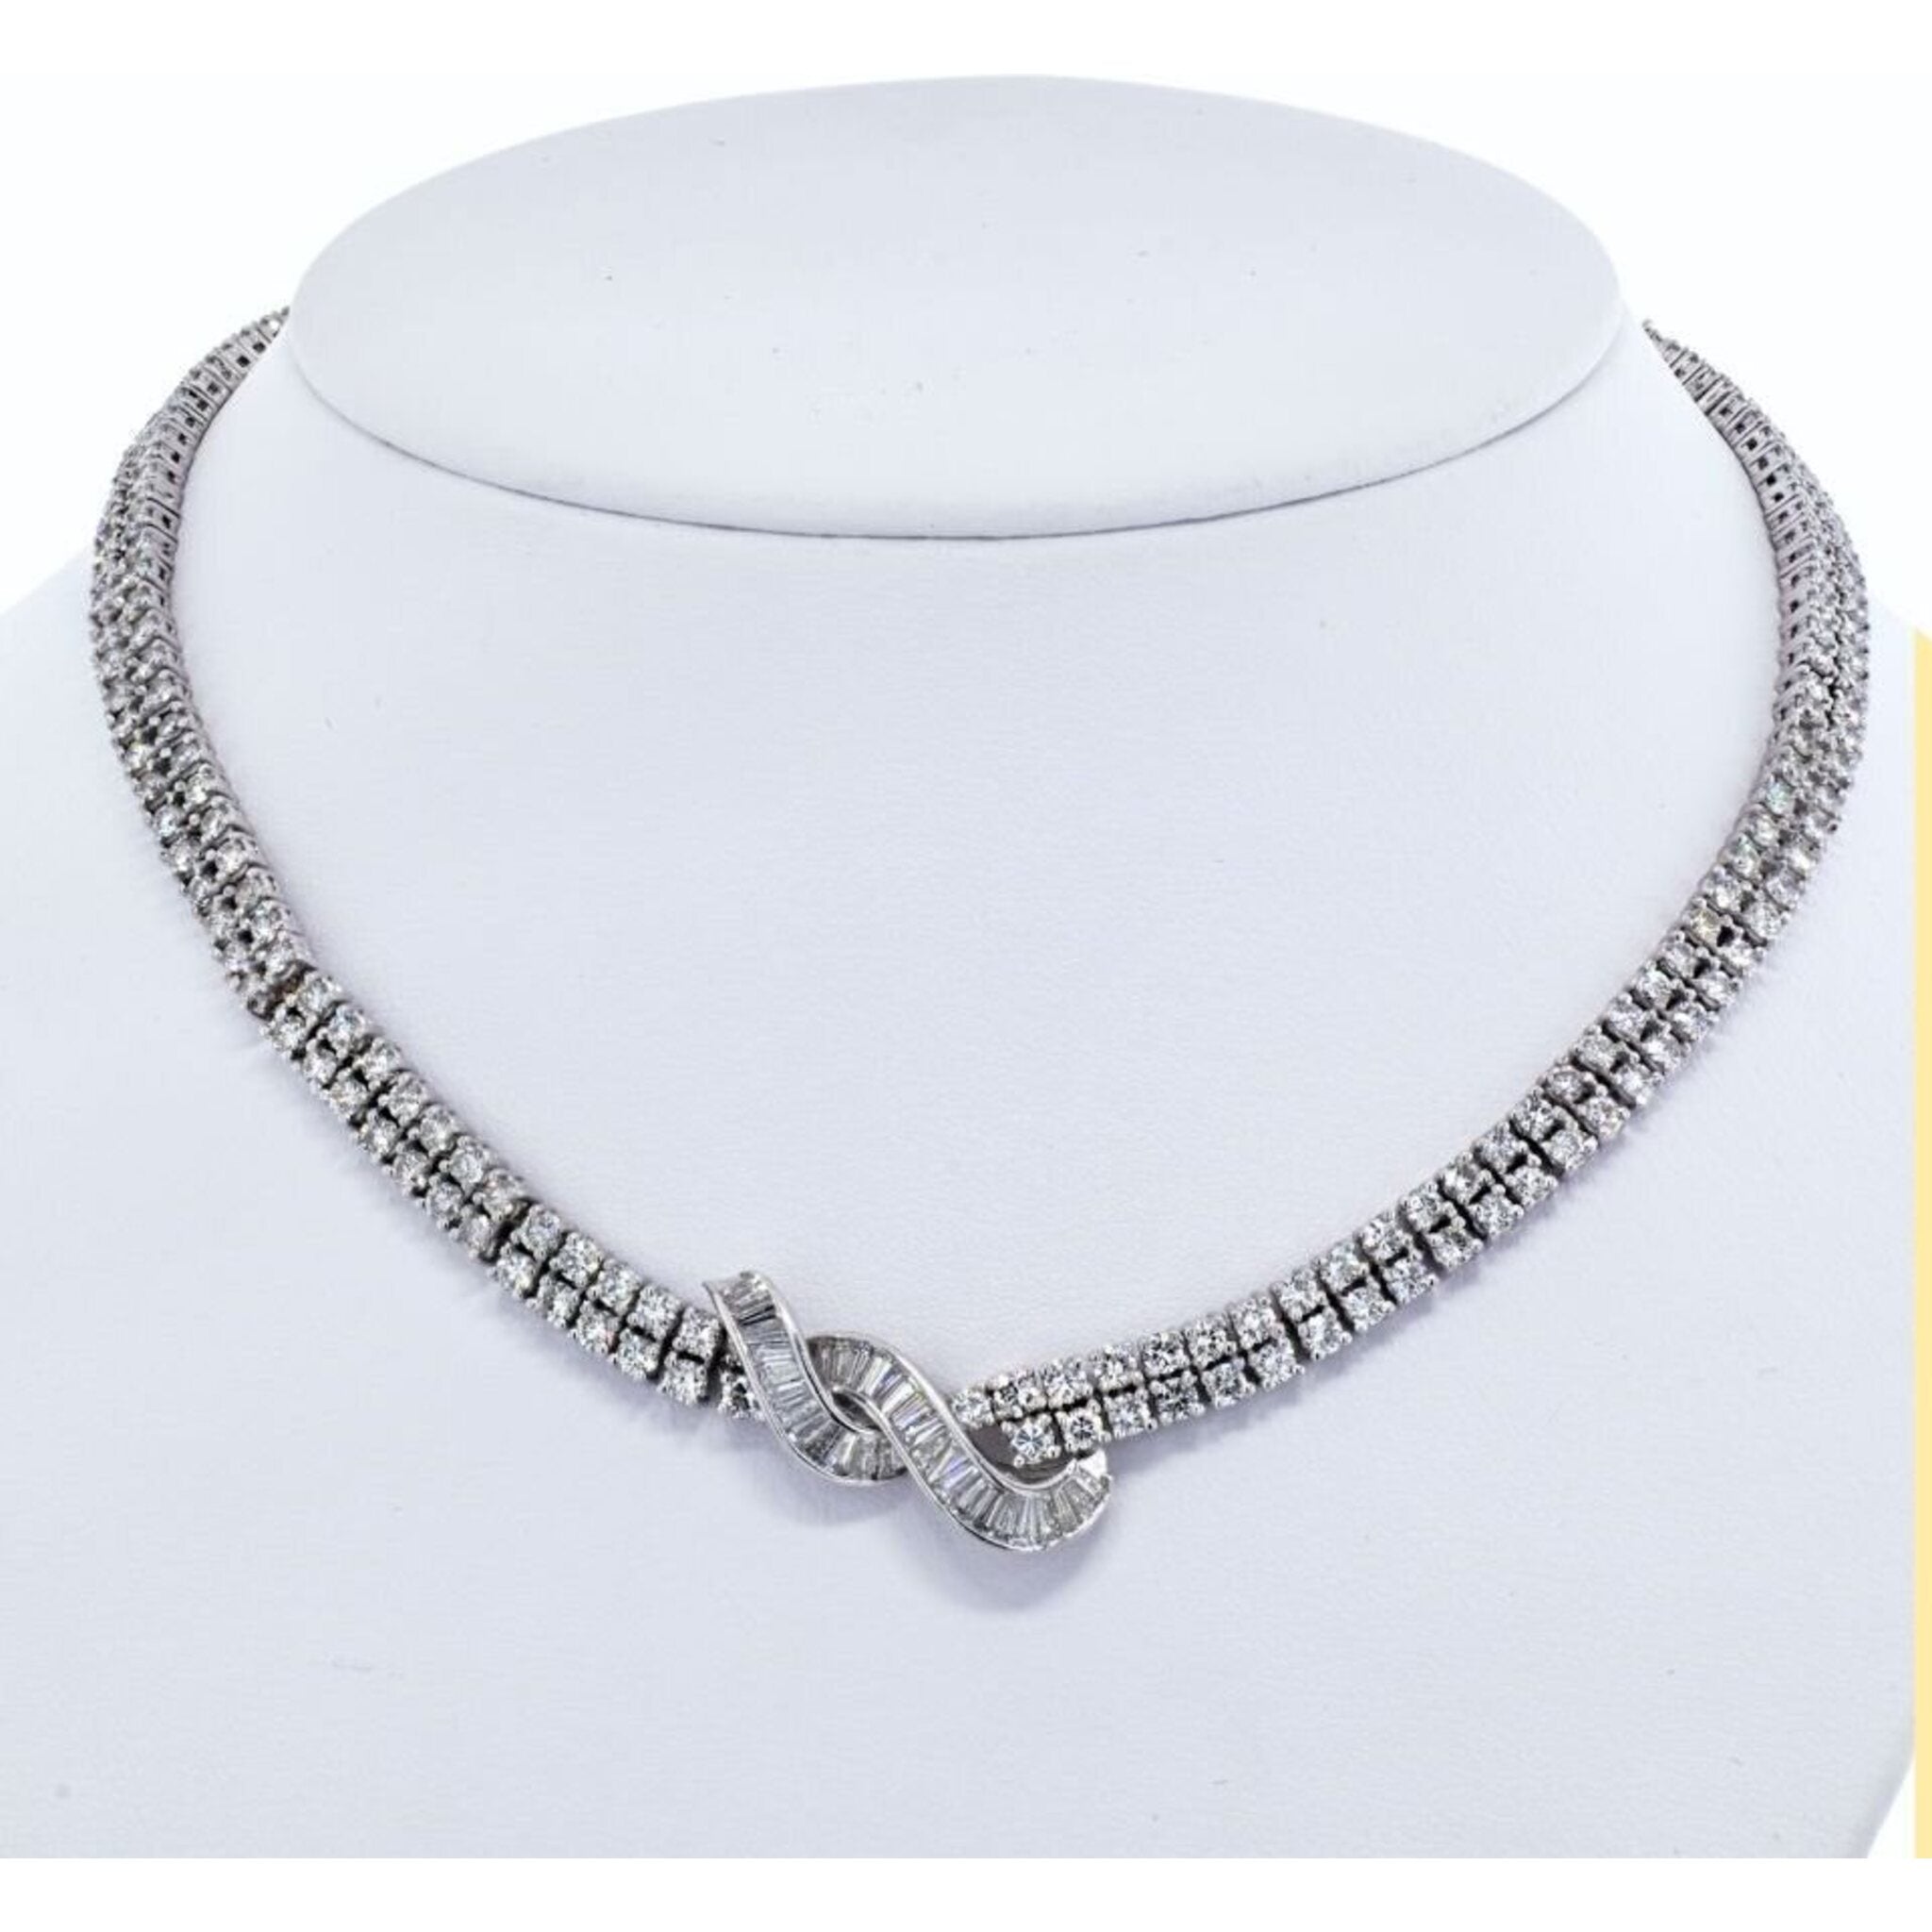 Men's stainless steel tennis necklace - Love & Aces